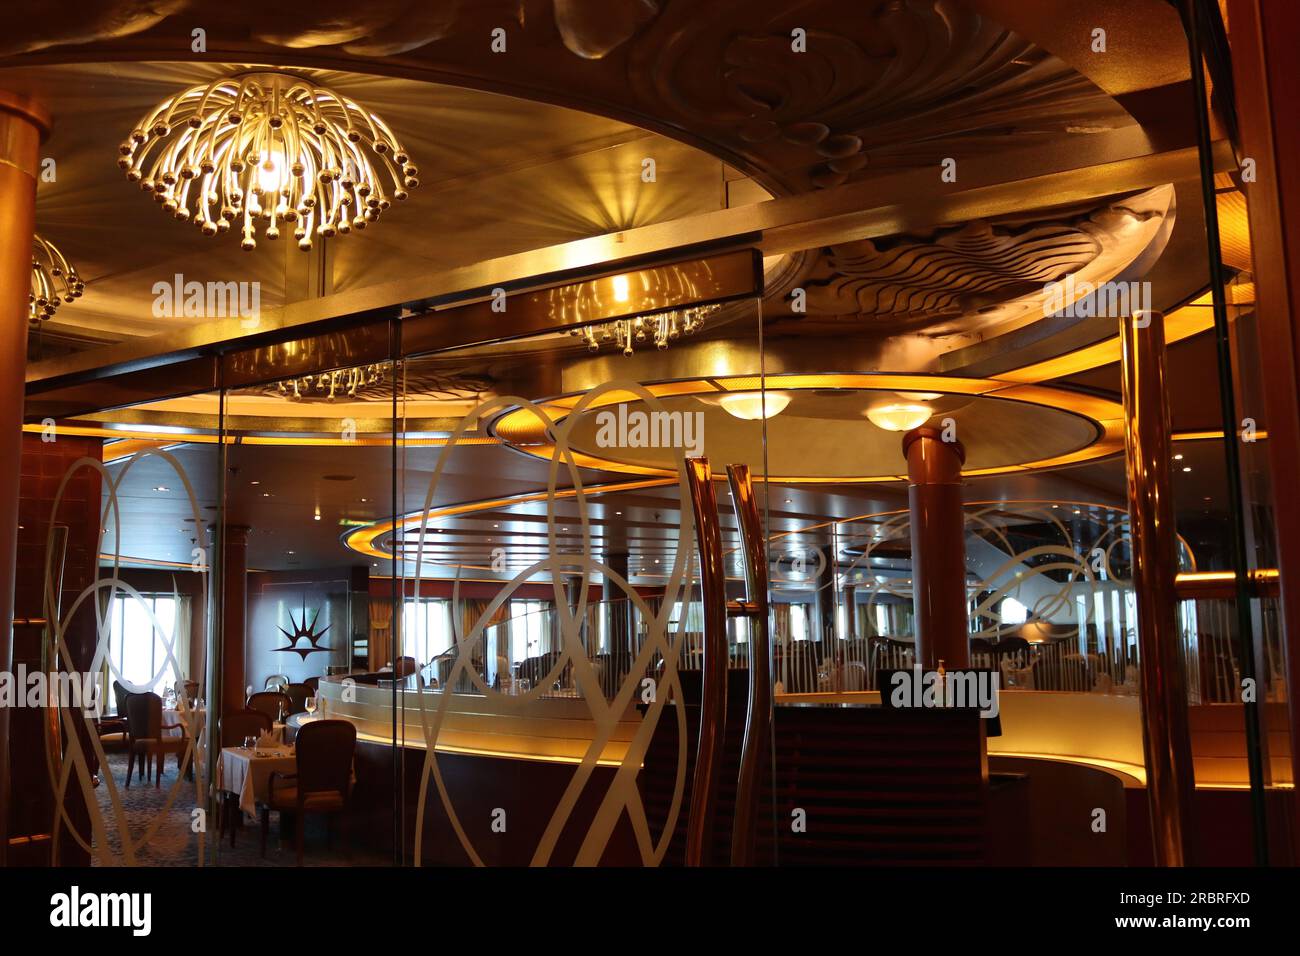 Restaurant arcadia cruise ship hi-res stock photography and images